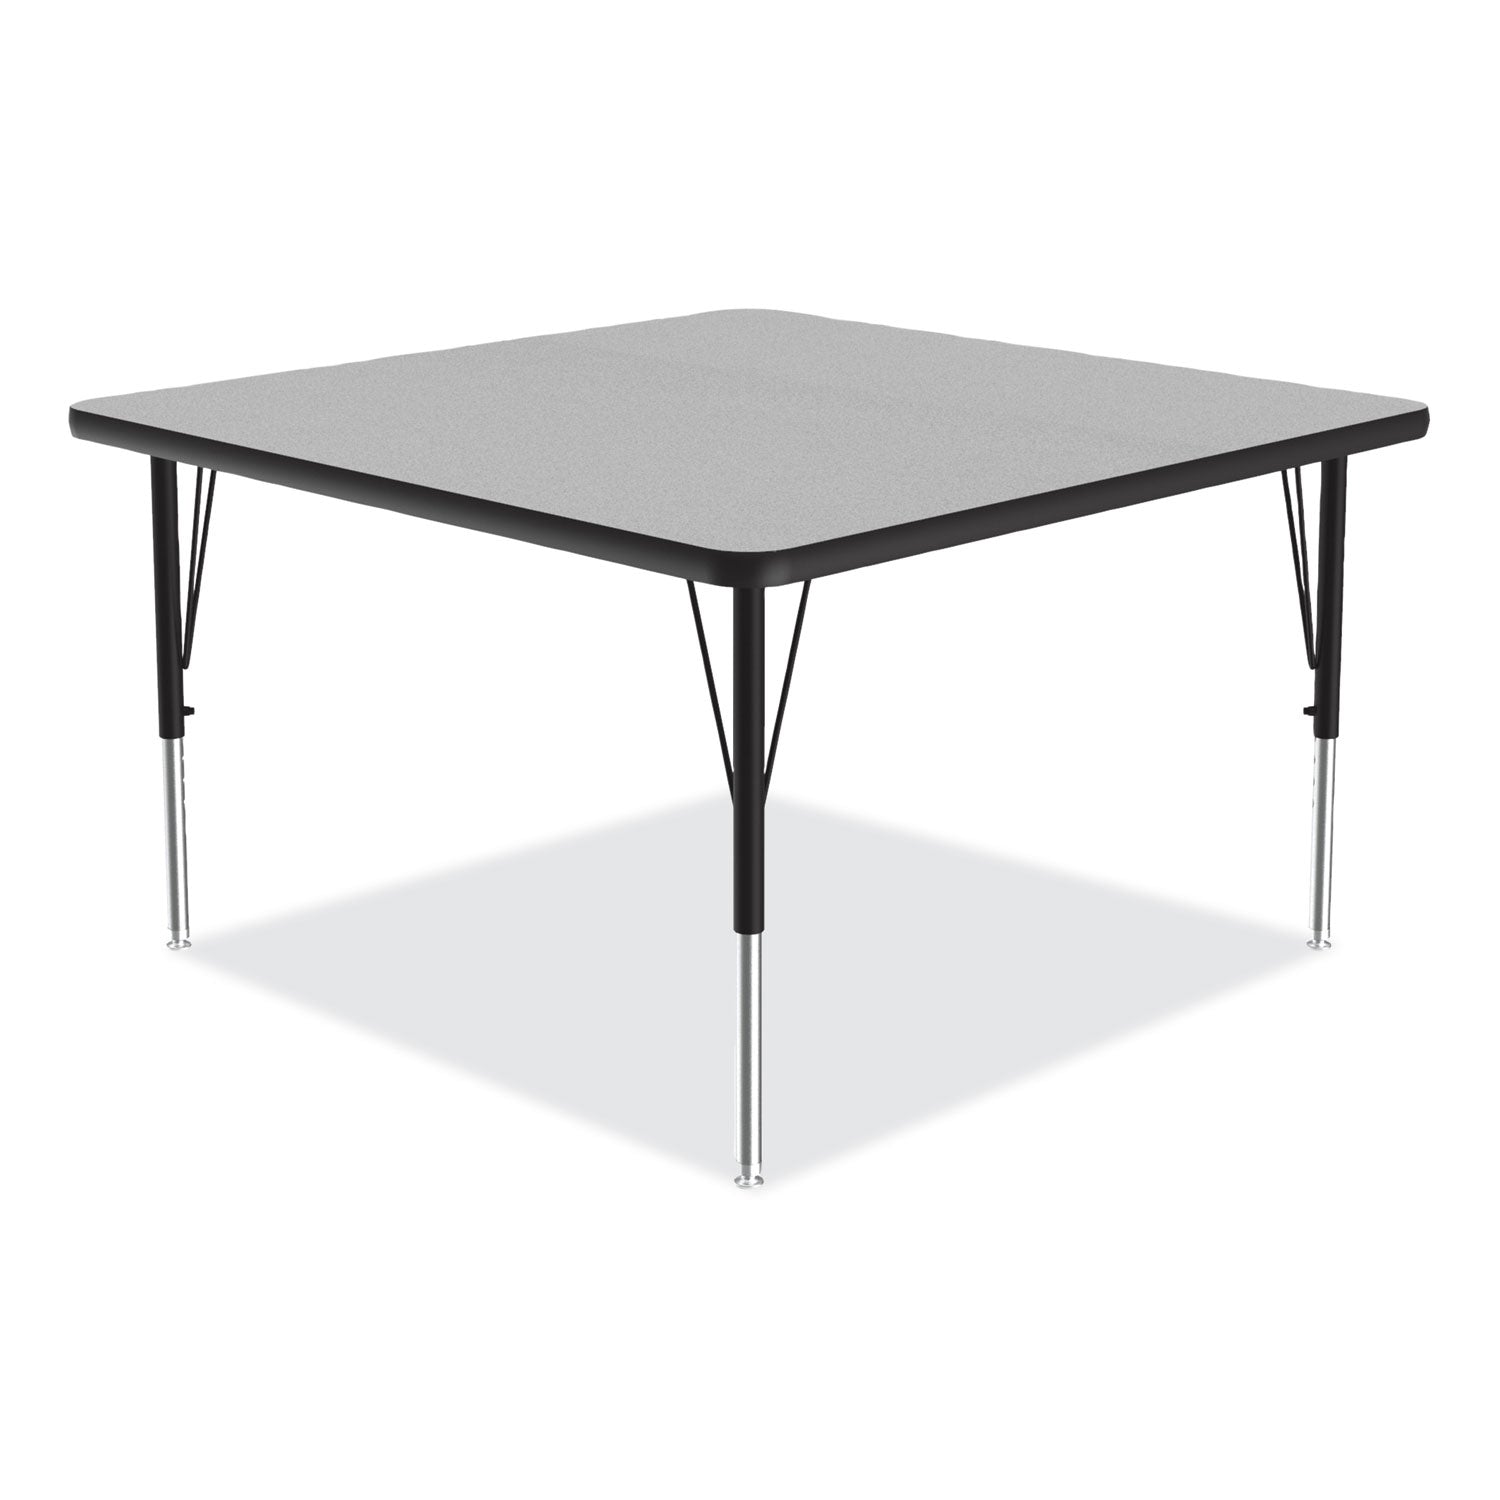 adjustable-activity-tables-square-48-x-48-x-19-to-29-gray-top-black-legs-4-pallet-ships-in-4-6-business-days_crl4848tf1595k4 - 6